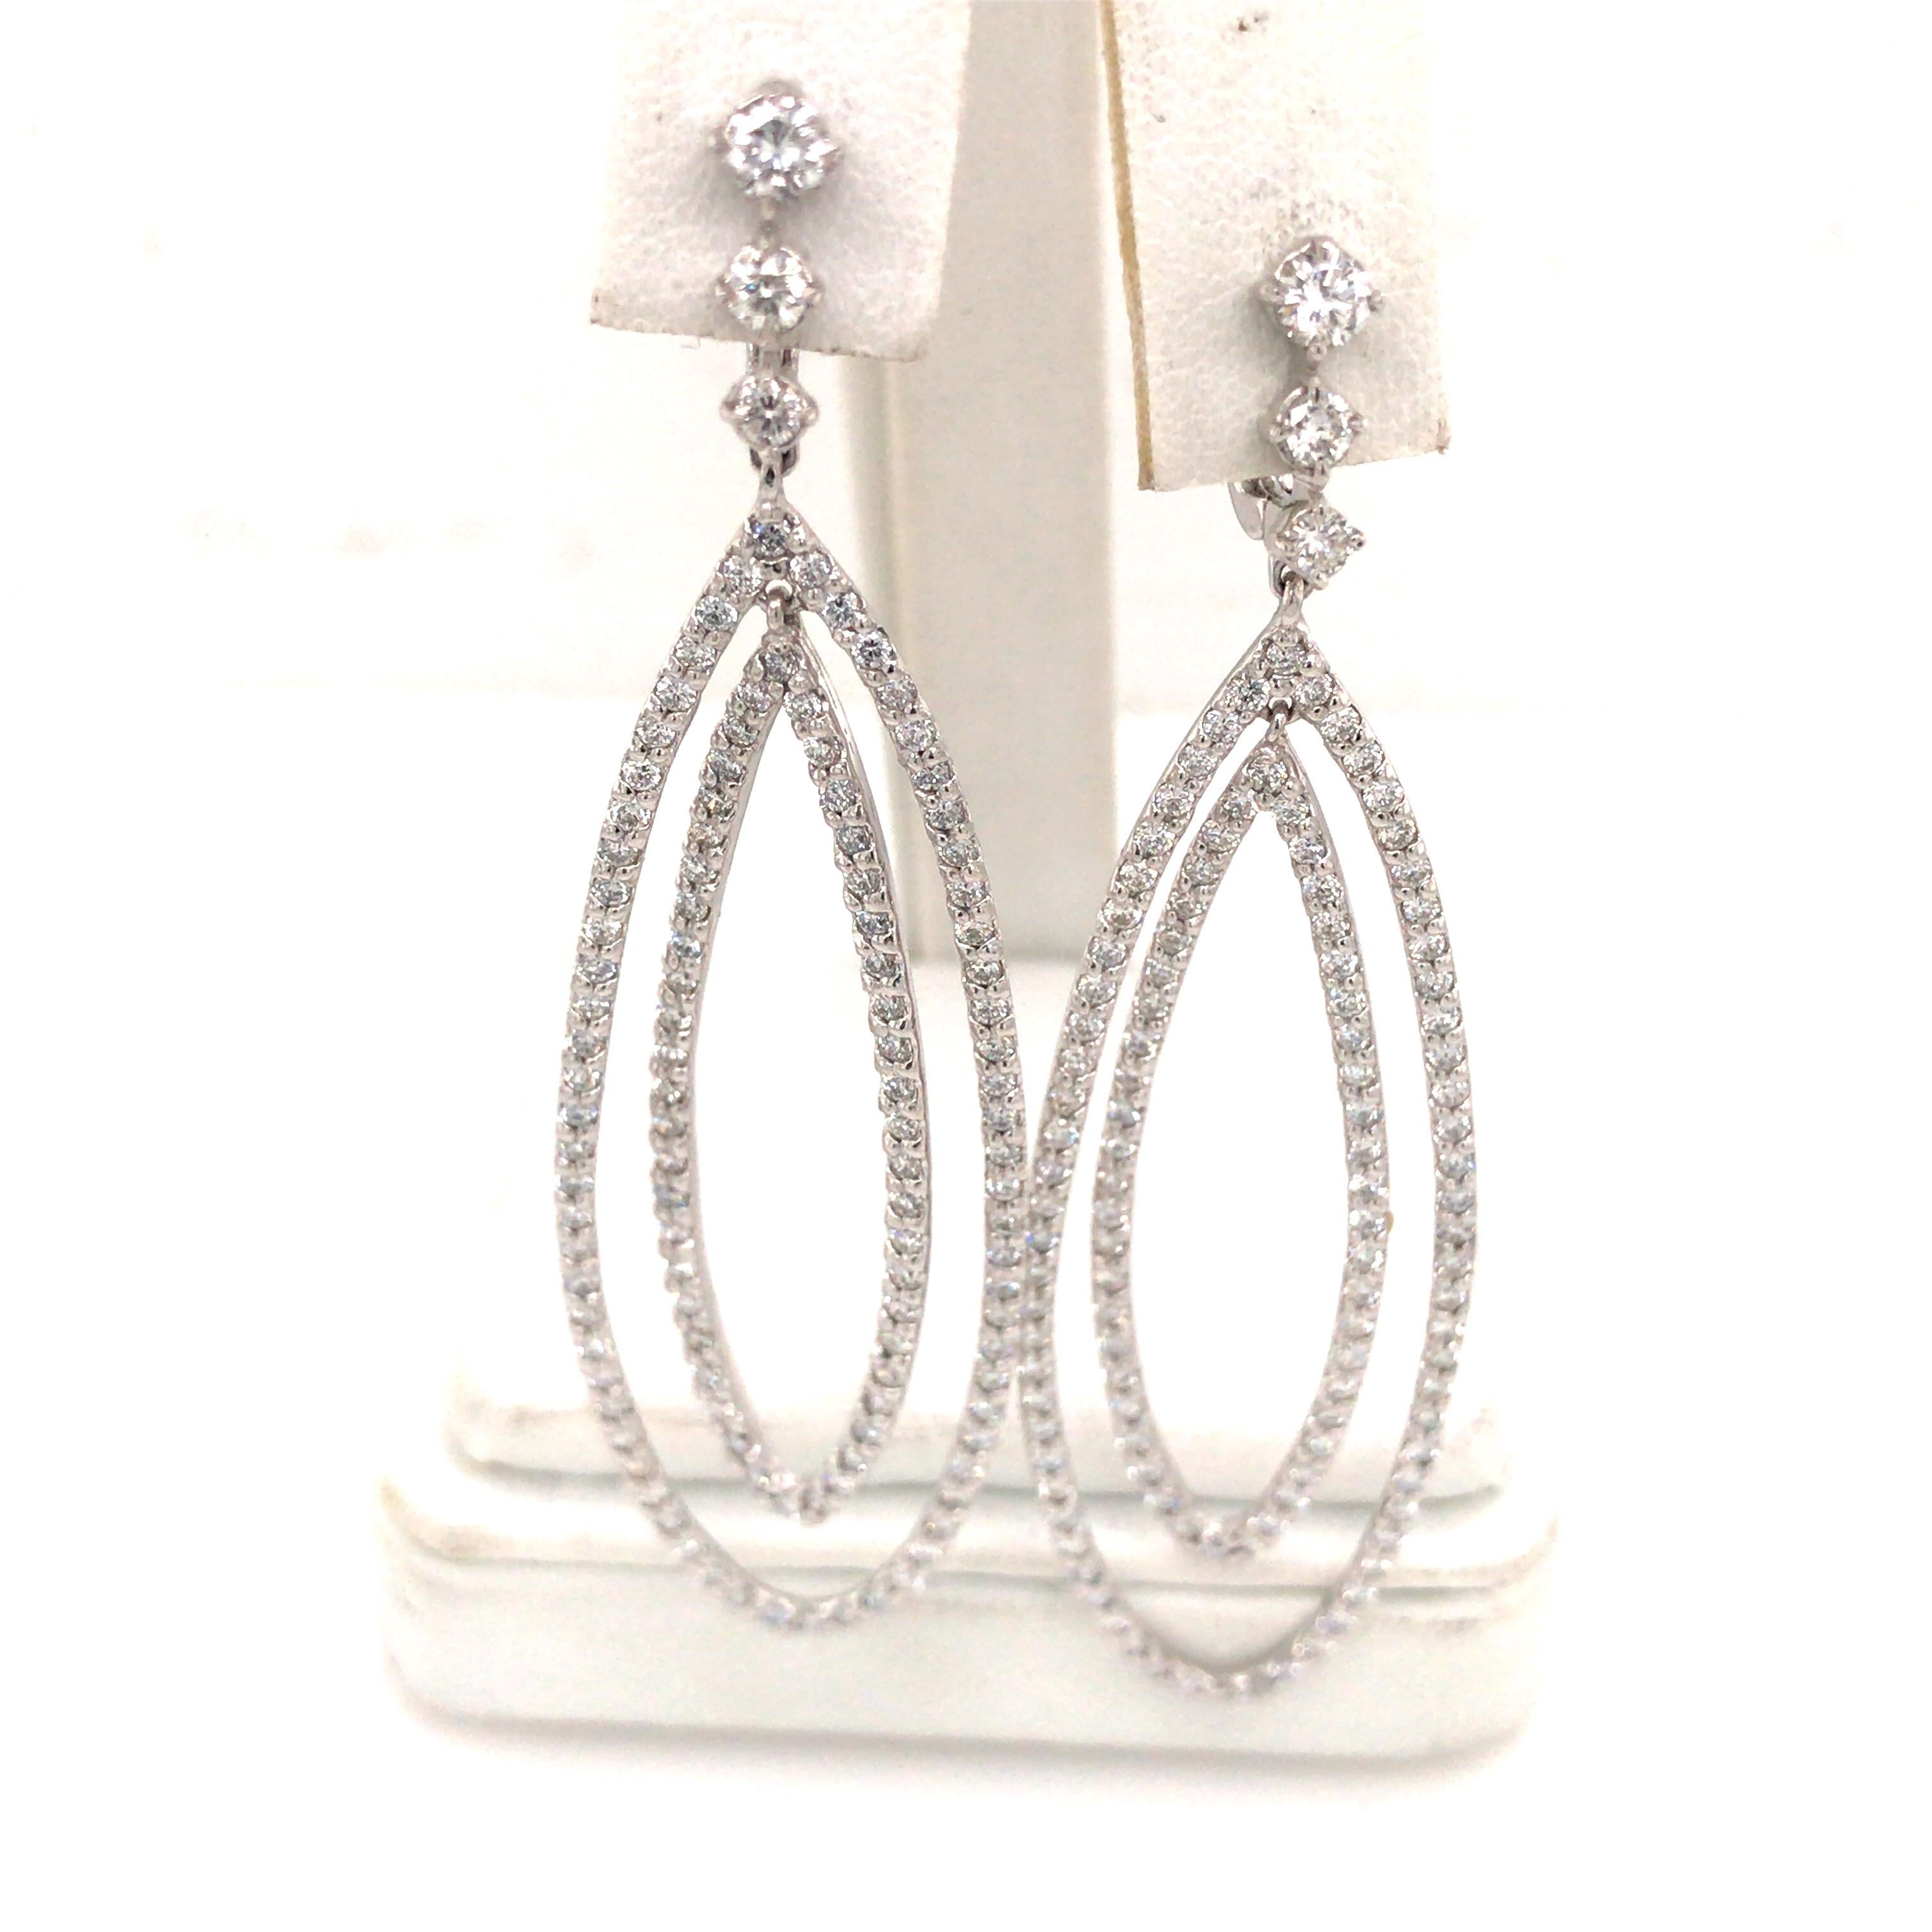 Geometric Diamond Drop Earrings in 14K White Gold expertly set with  Round Brilliant Cut diamonds weighing 4.21 carat total weight, G-H in color and VS in clarity.  The Earrings measure 2 3/4 inches in length and 3/4 inch in width at the widest